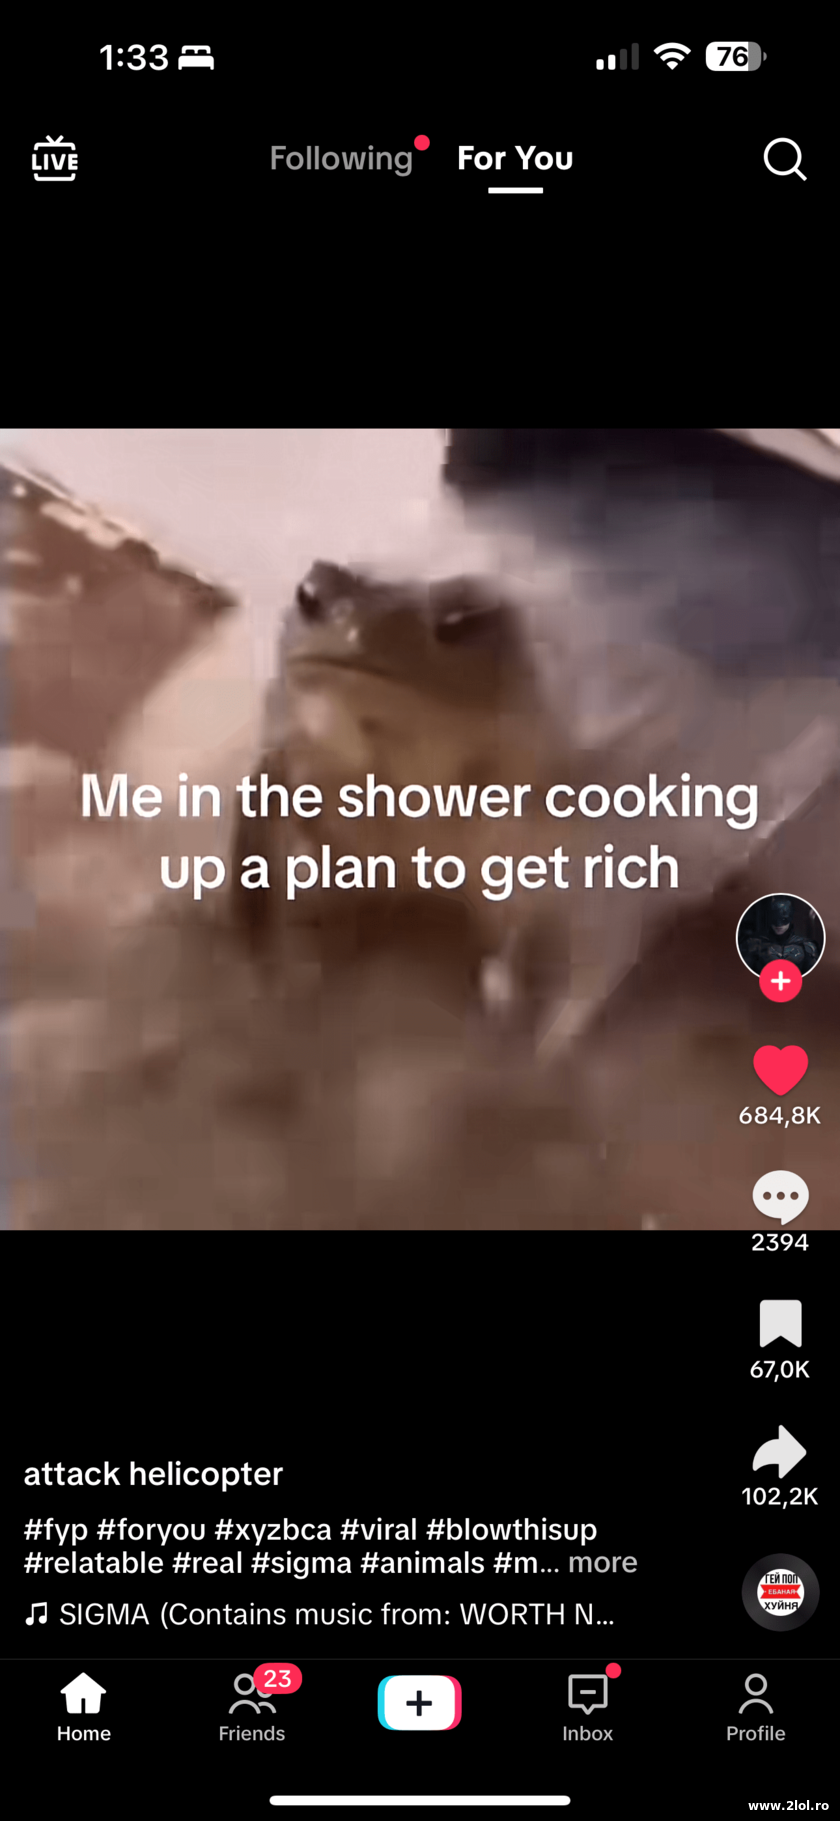 Me in shower cooking up a plan to get rich | poze haioase